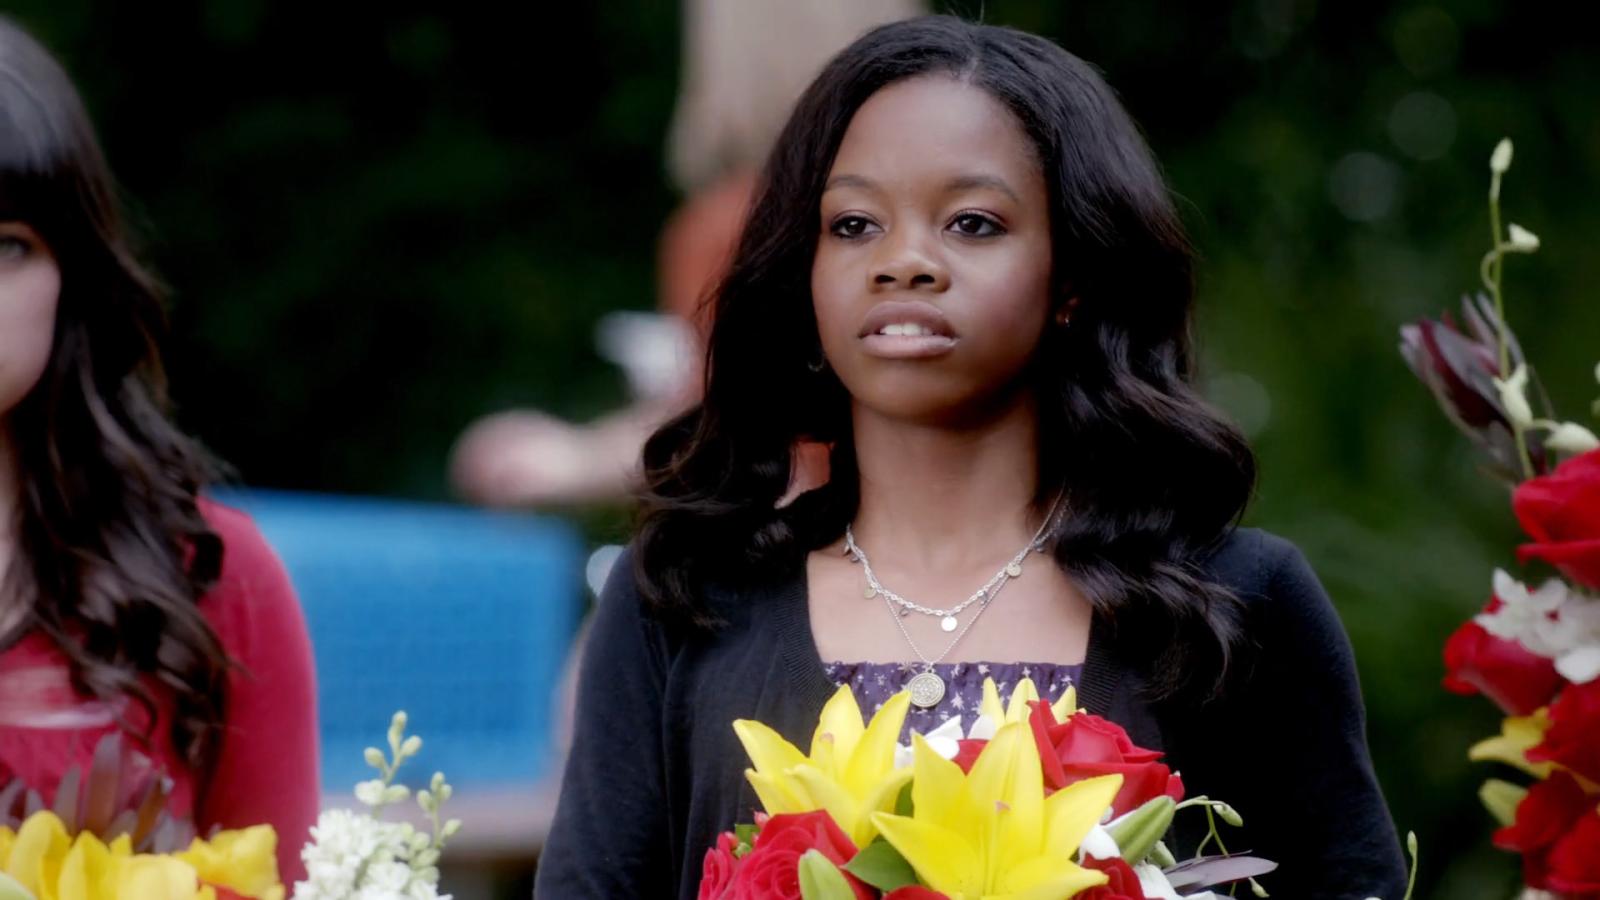 The Vampire Diaries: 7 Unforgettable Guest Stars Who Stole the Show - image 4